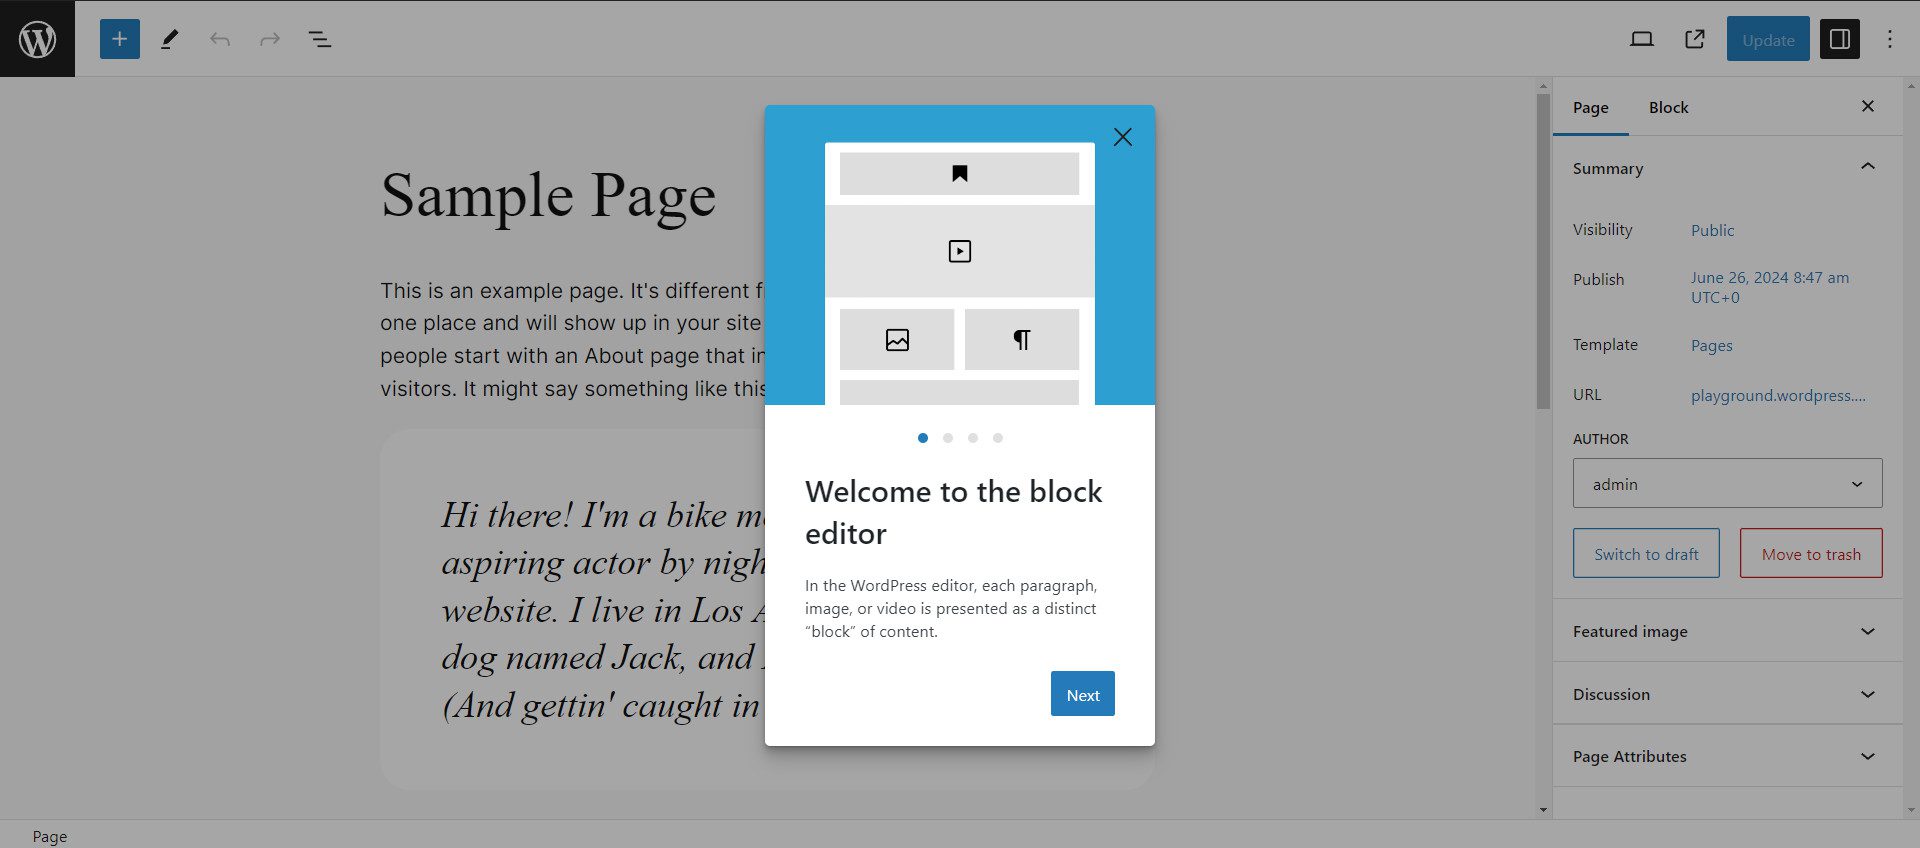 Block Editor Welcome Screen for First Time Users